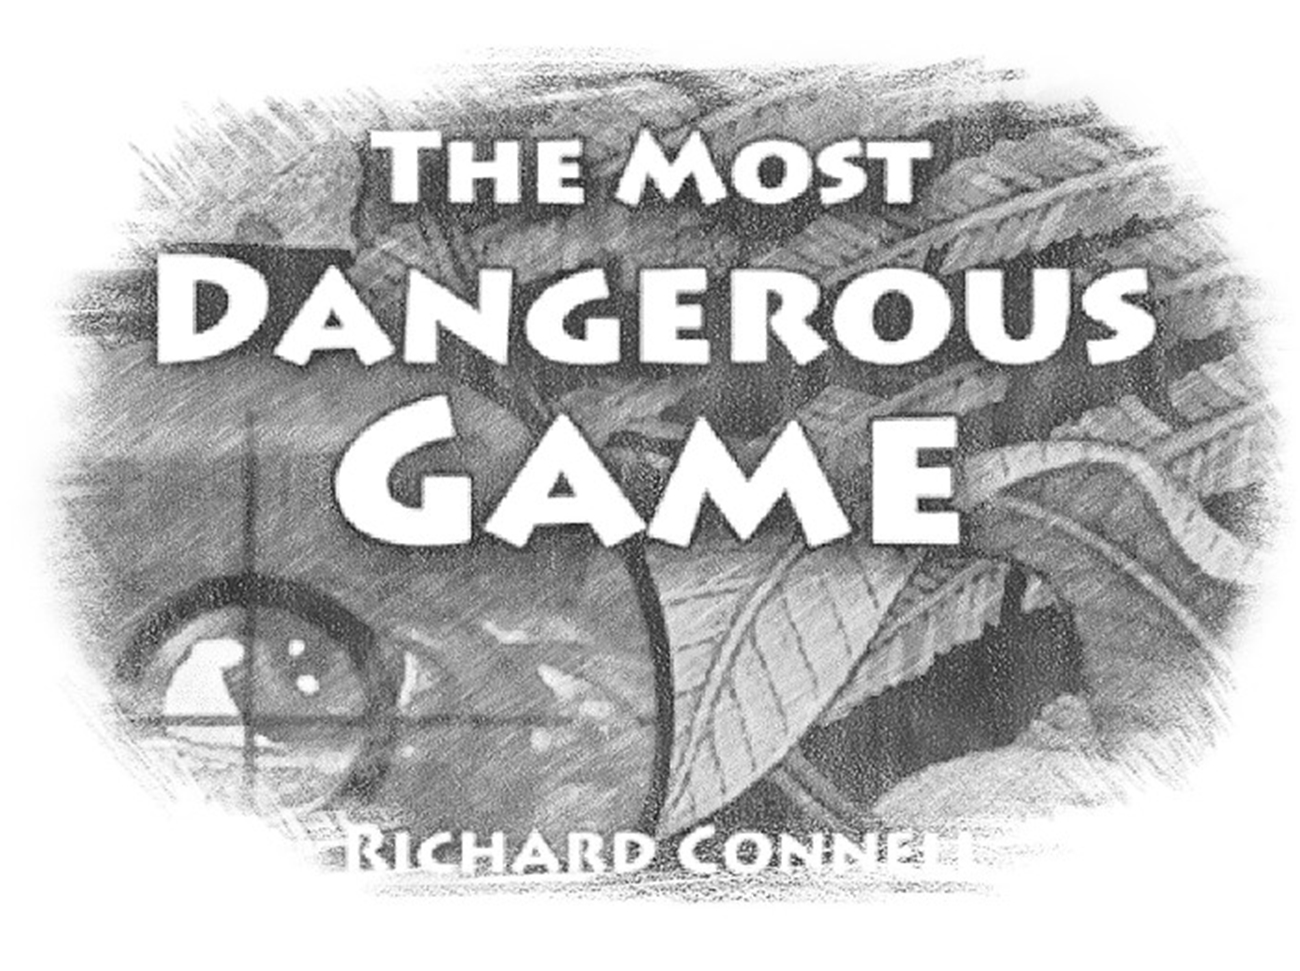 Notes: “The Most Dangerous Game”